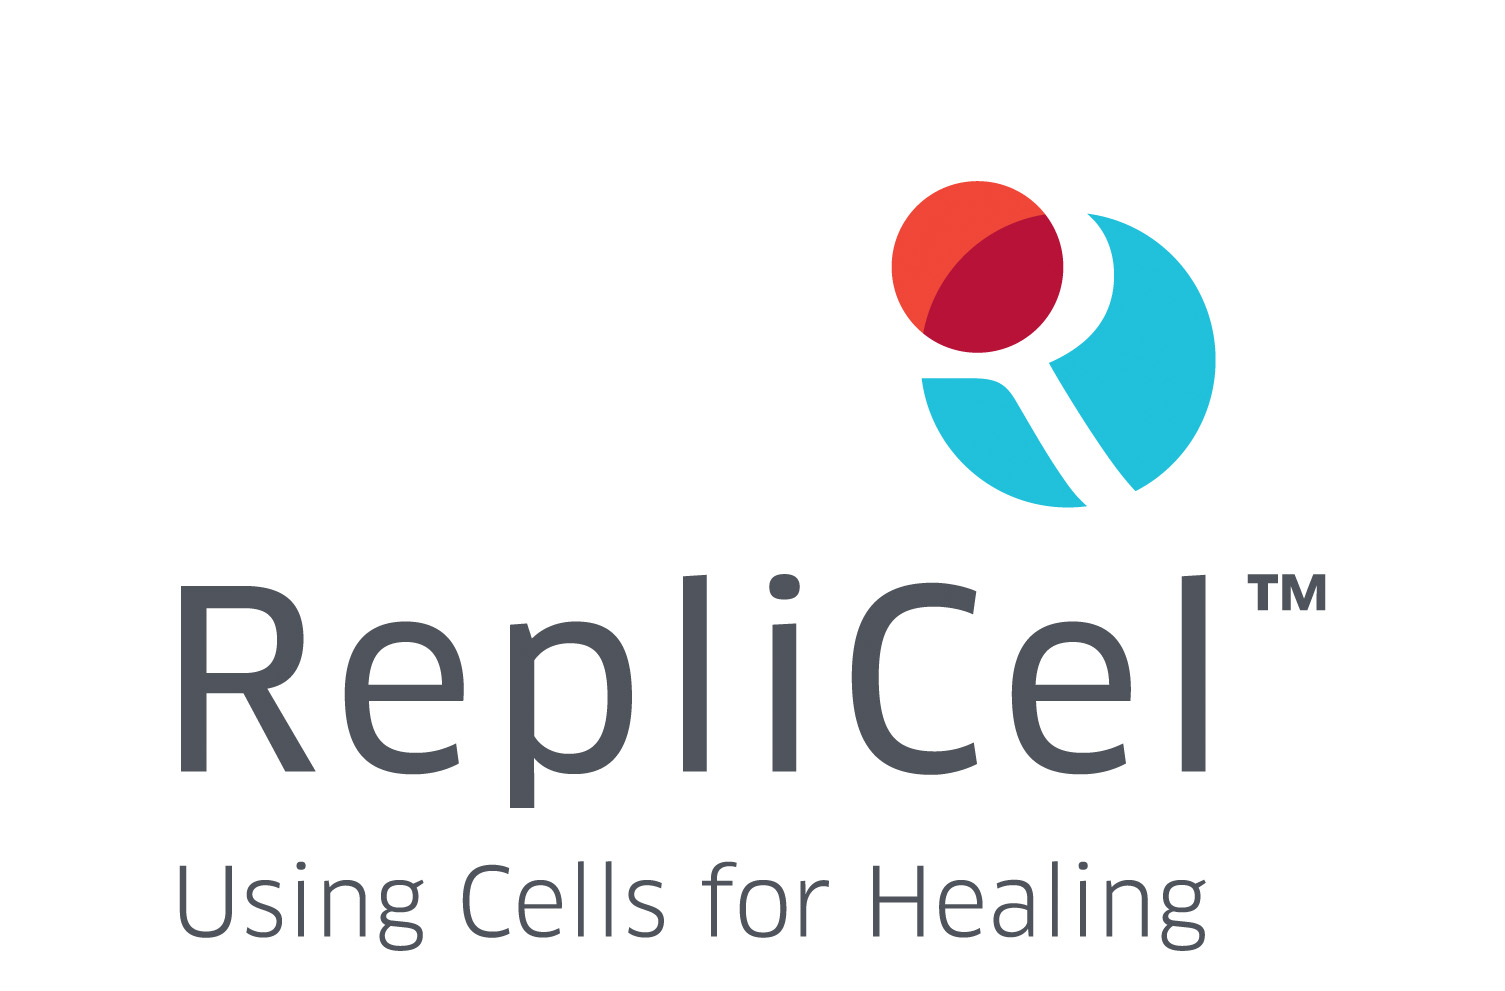 RepliCel Life Sciences, Inc., Monday, May 17, 2021, Press release picture